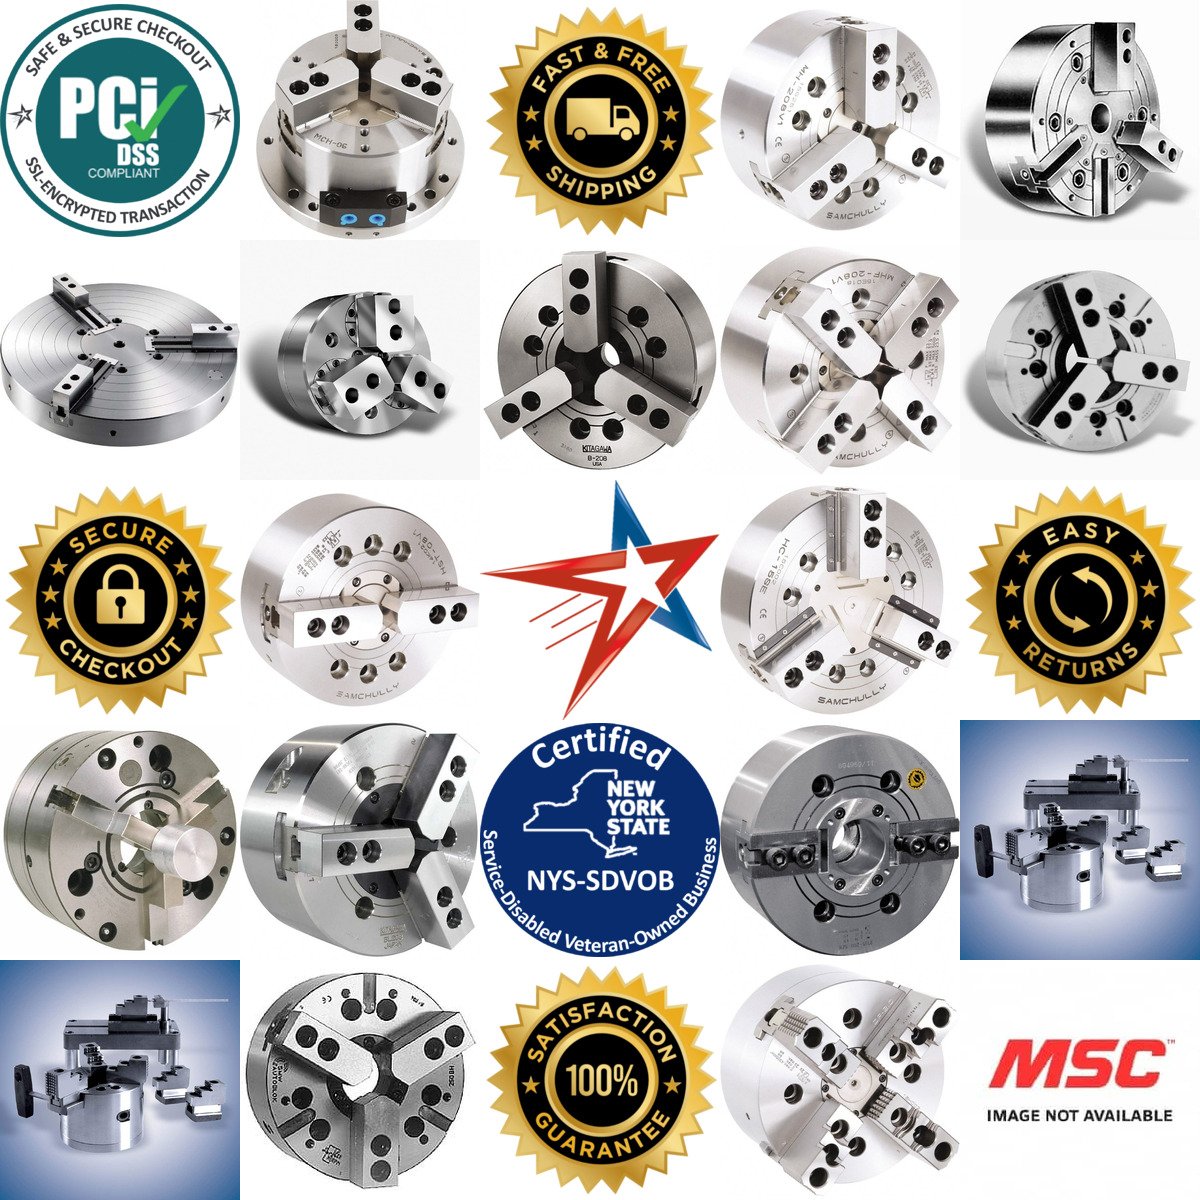 A selection of Power Lathe Chucks products on GoVets